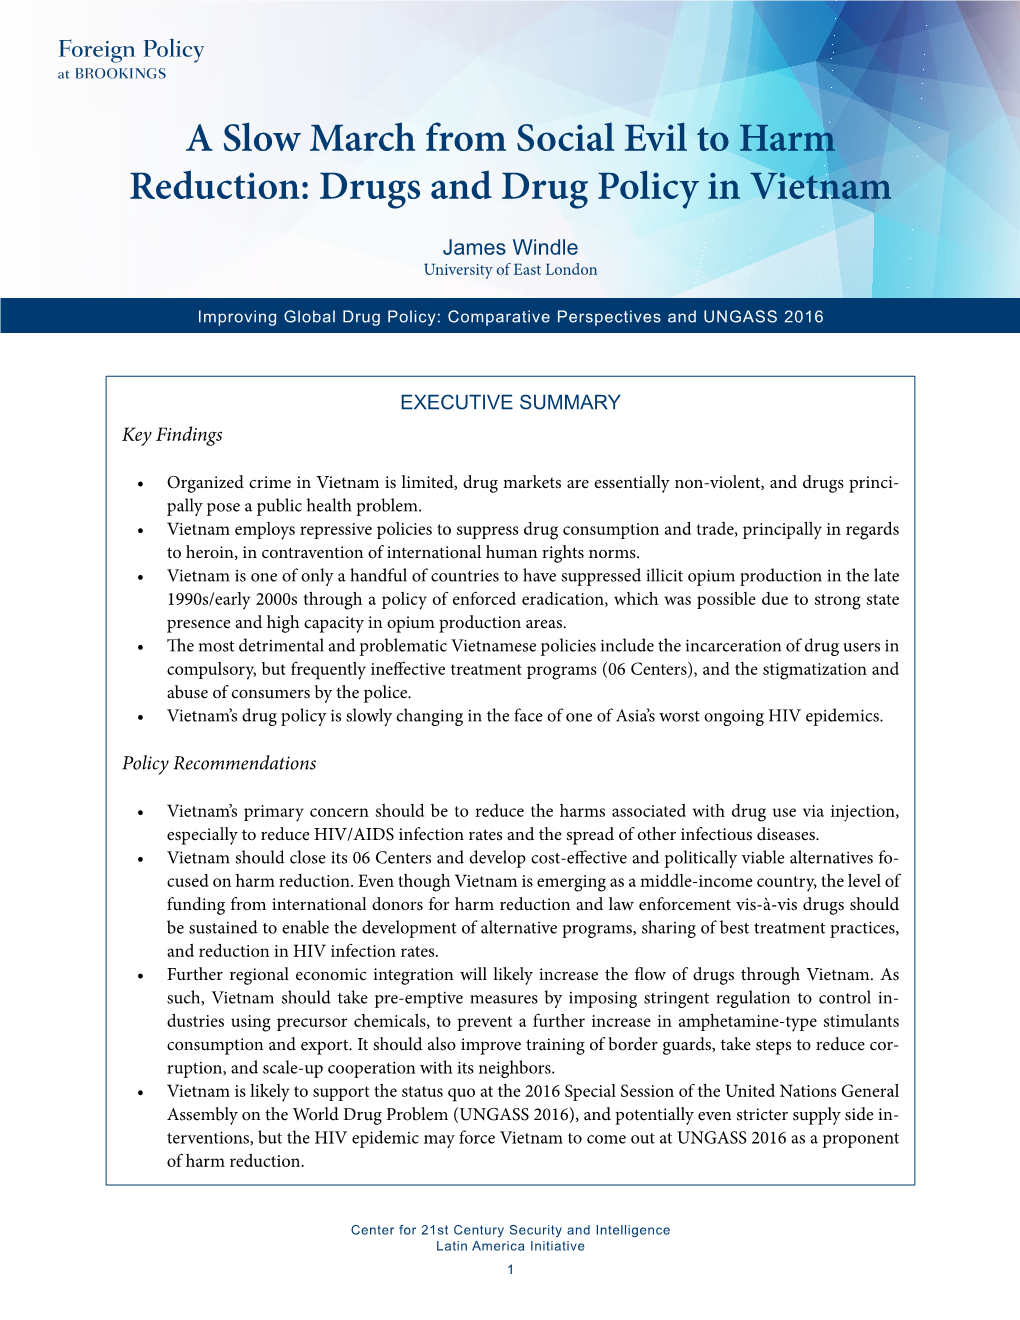 Drugs and Drug Policy in Vietnam